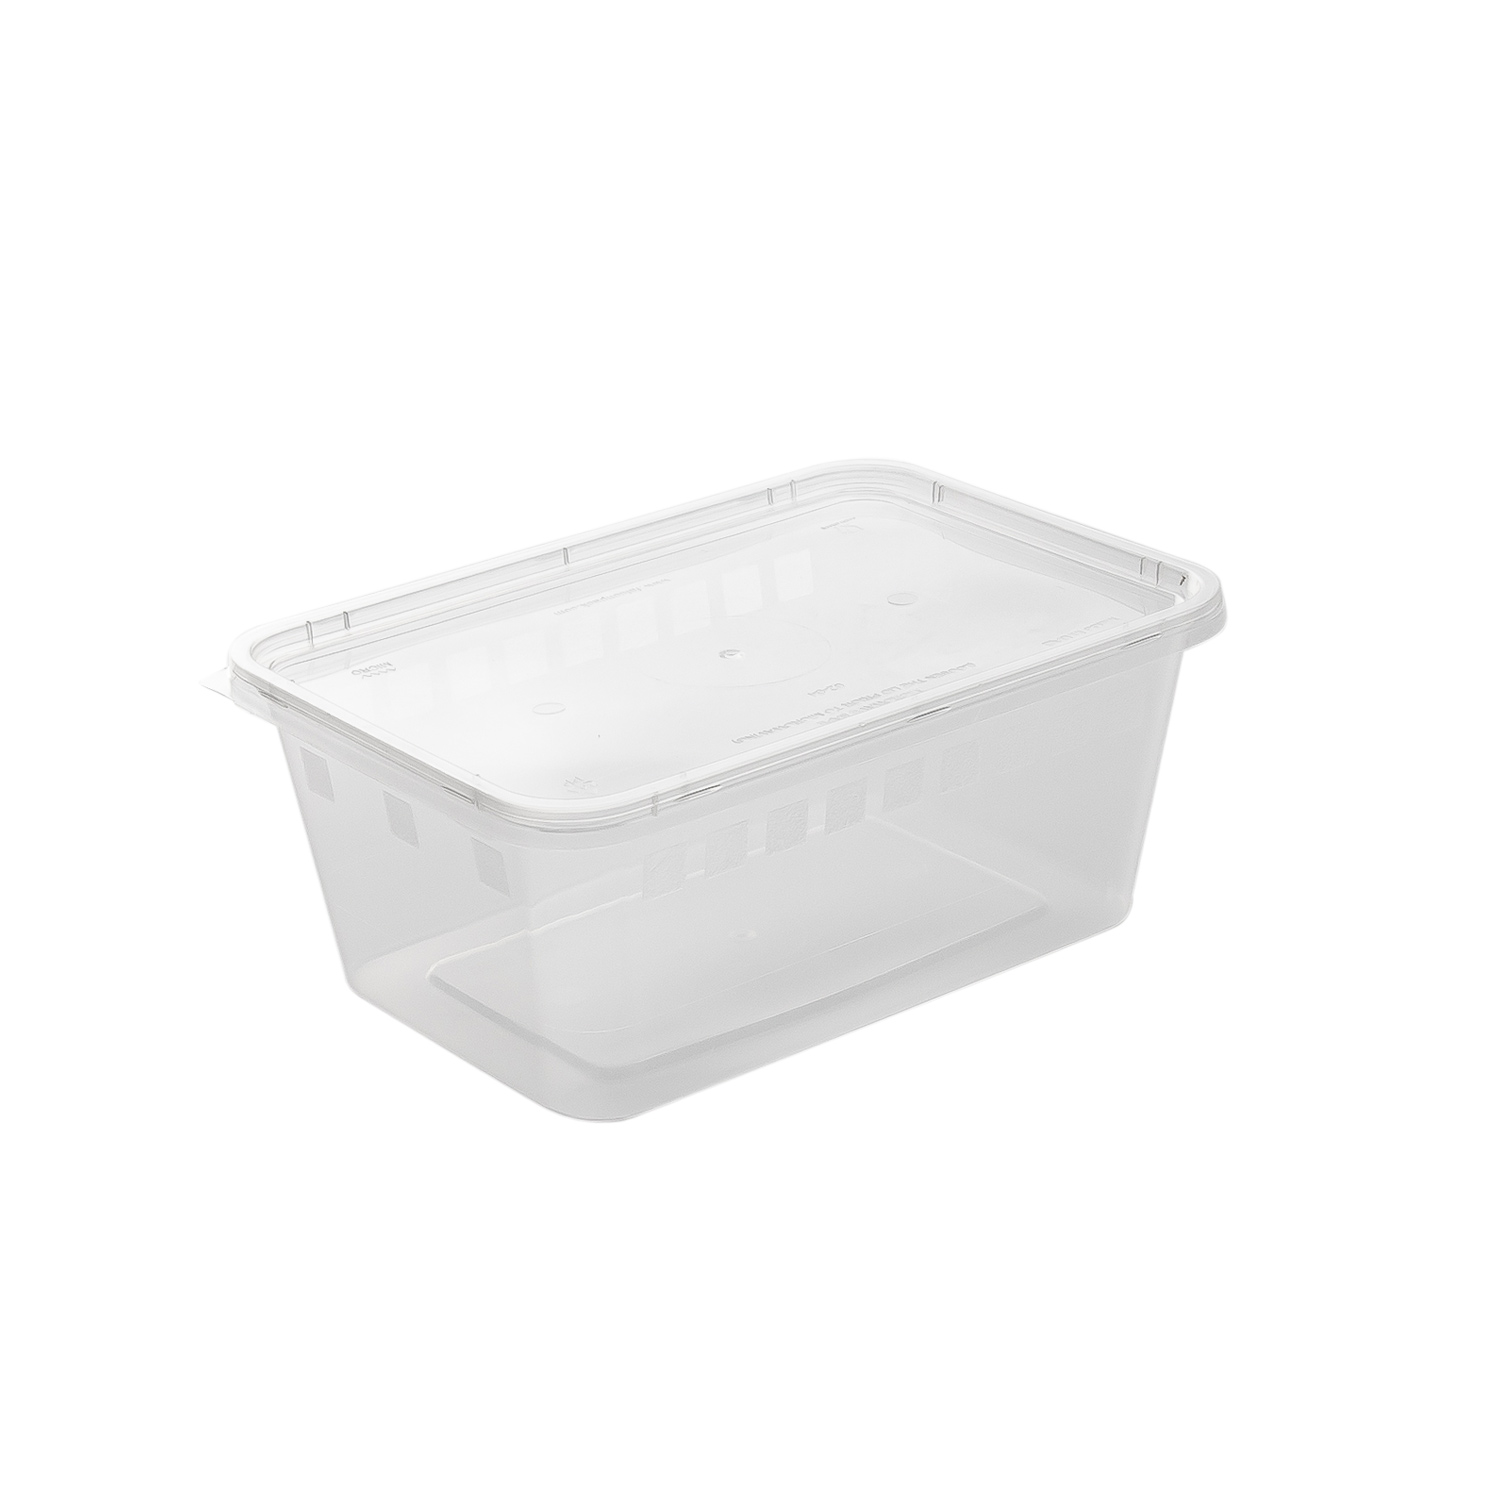 Lids for Microwave Containers (Fits 1500 cc containers)